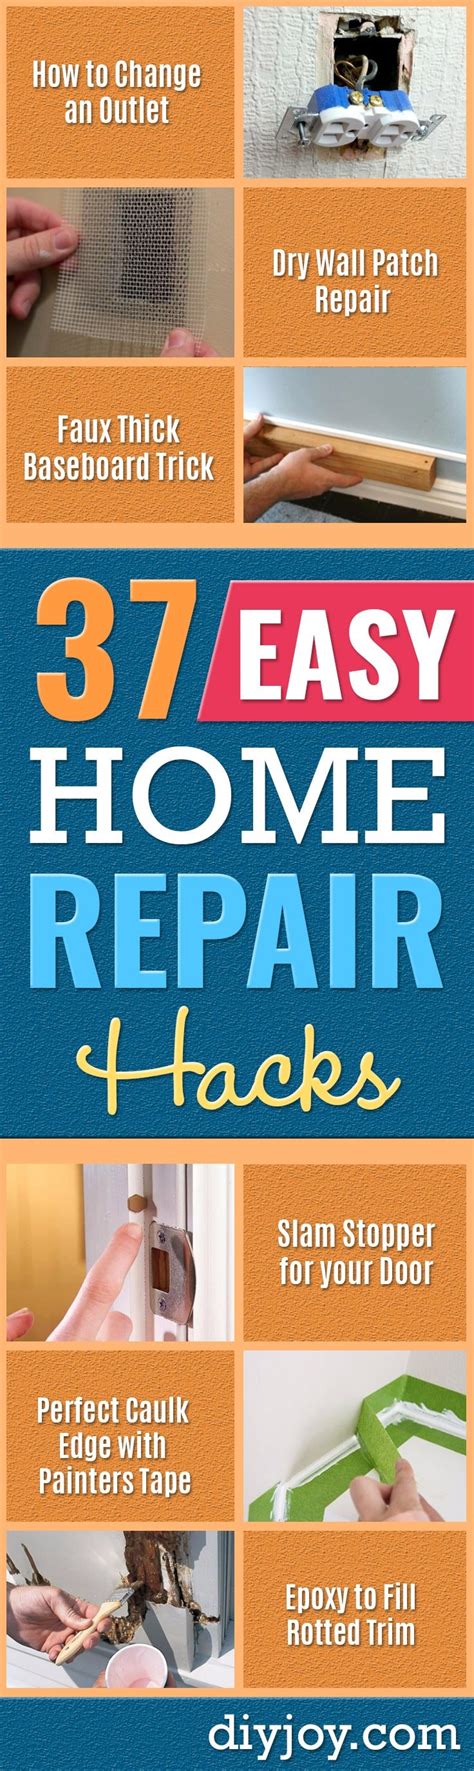 37 Easy Home Repair Hacks To Try Today